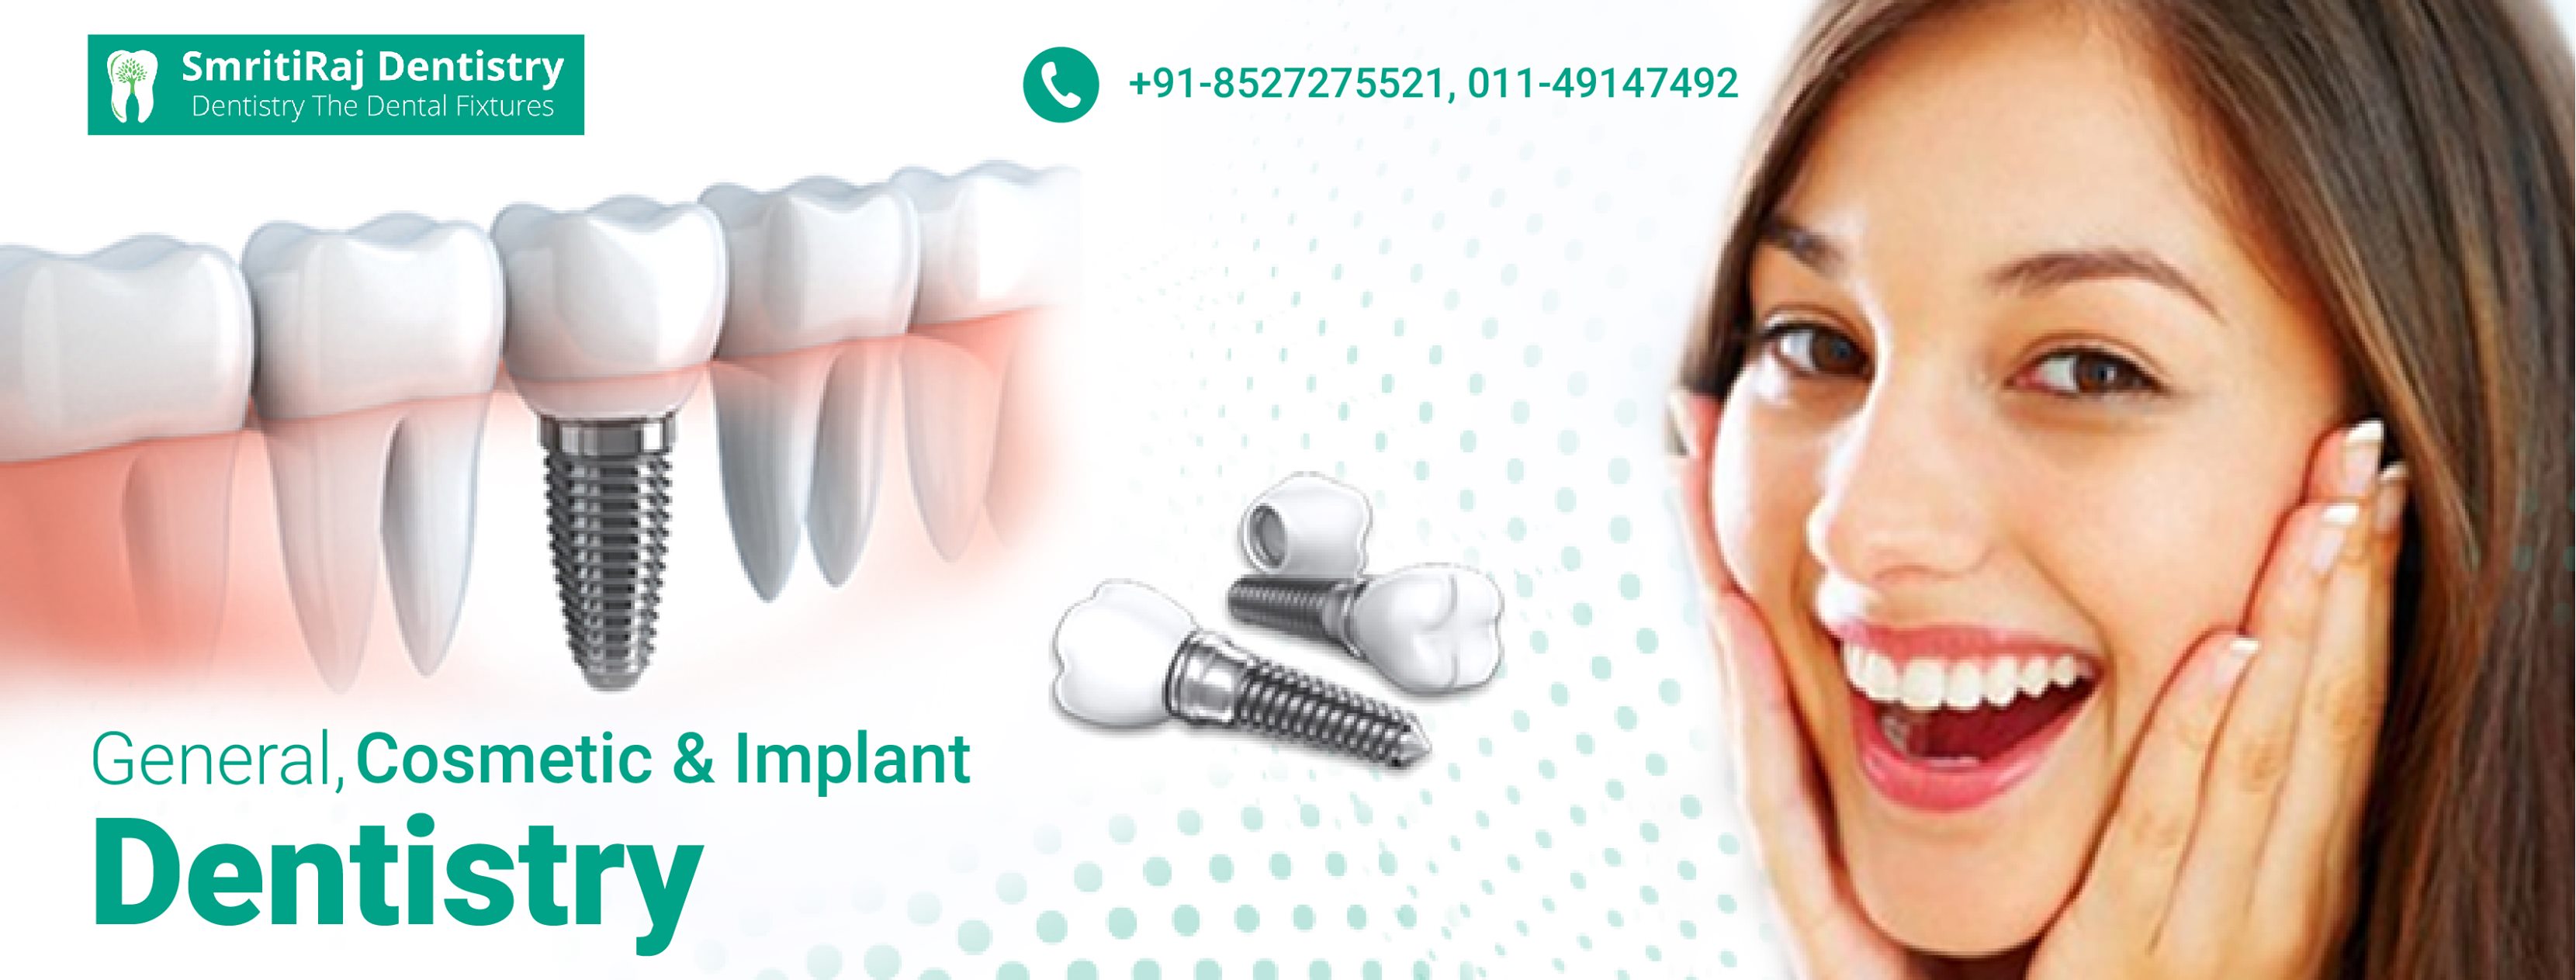 Best dentist near meHealth and BeautyHealth Care ProductsWest DelhiDwarka